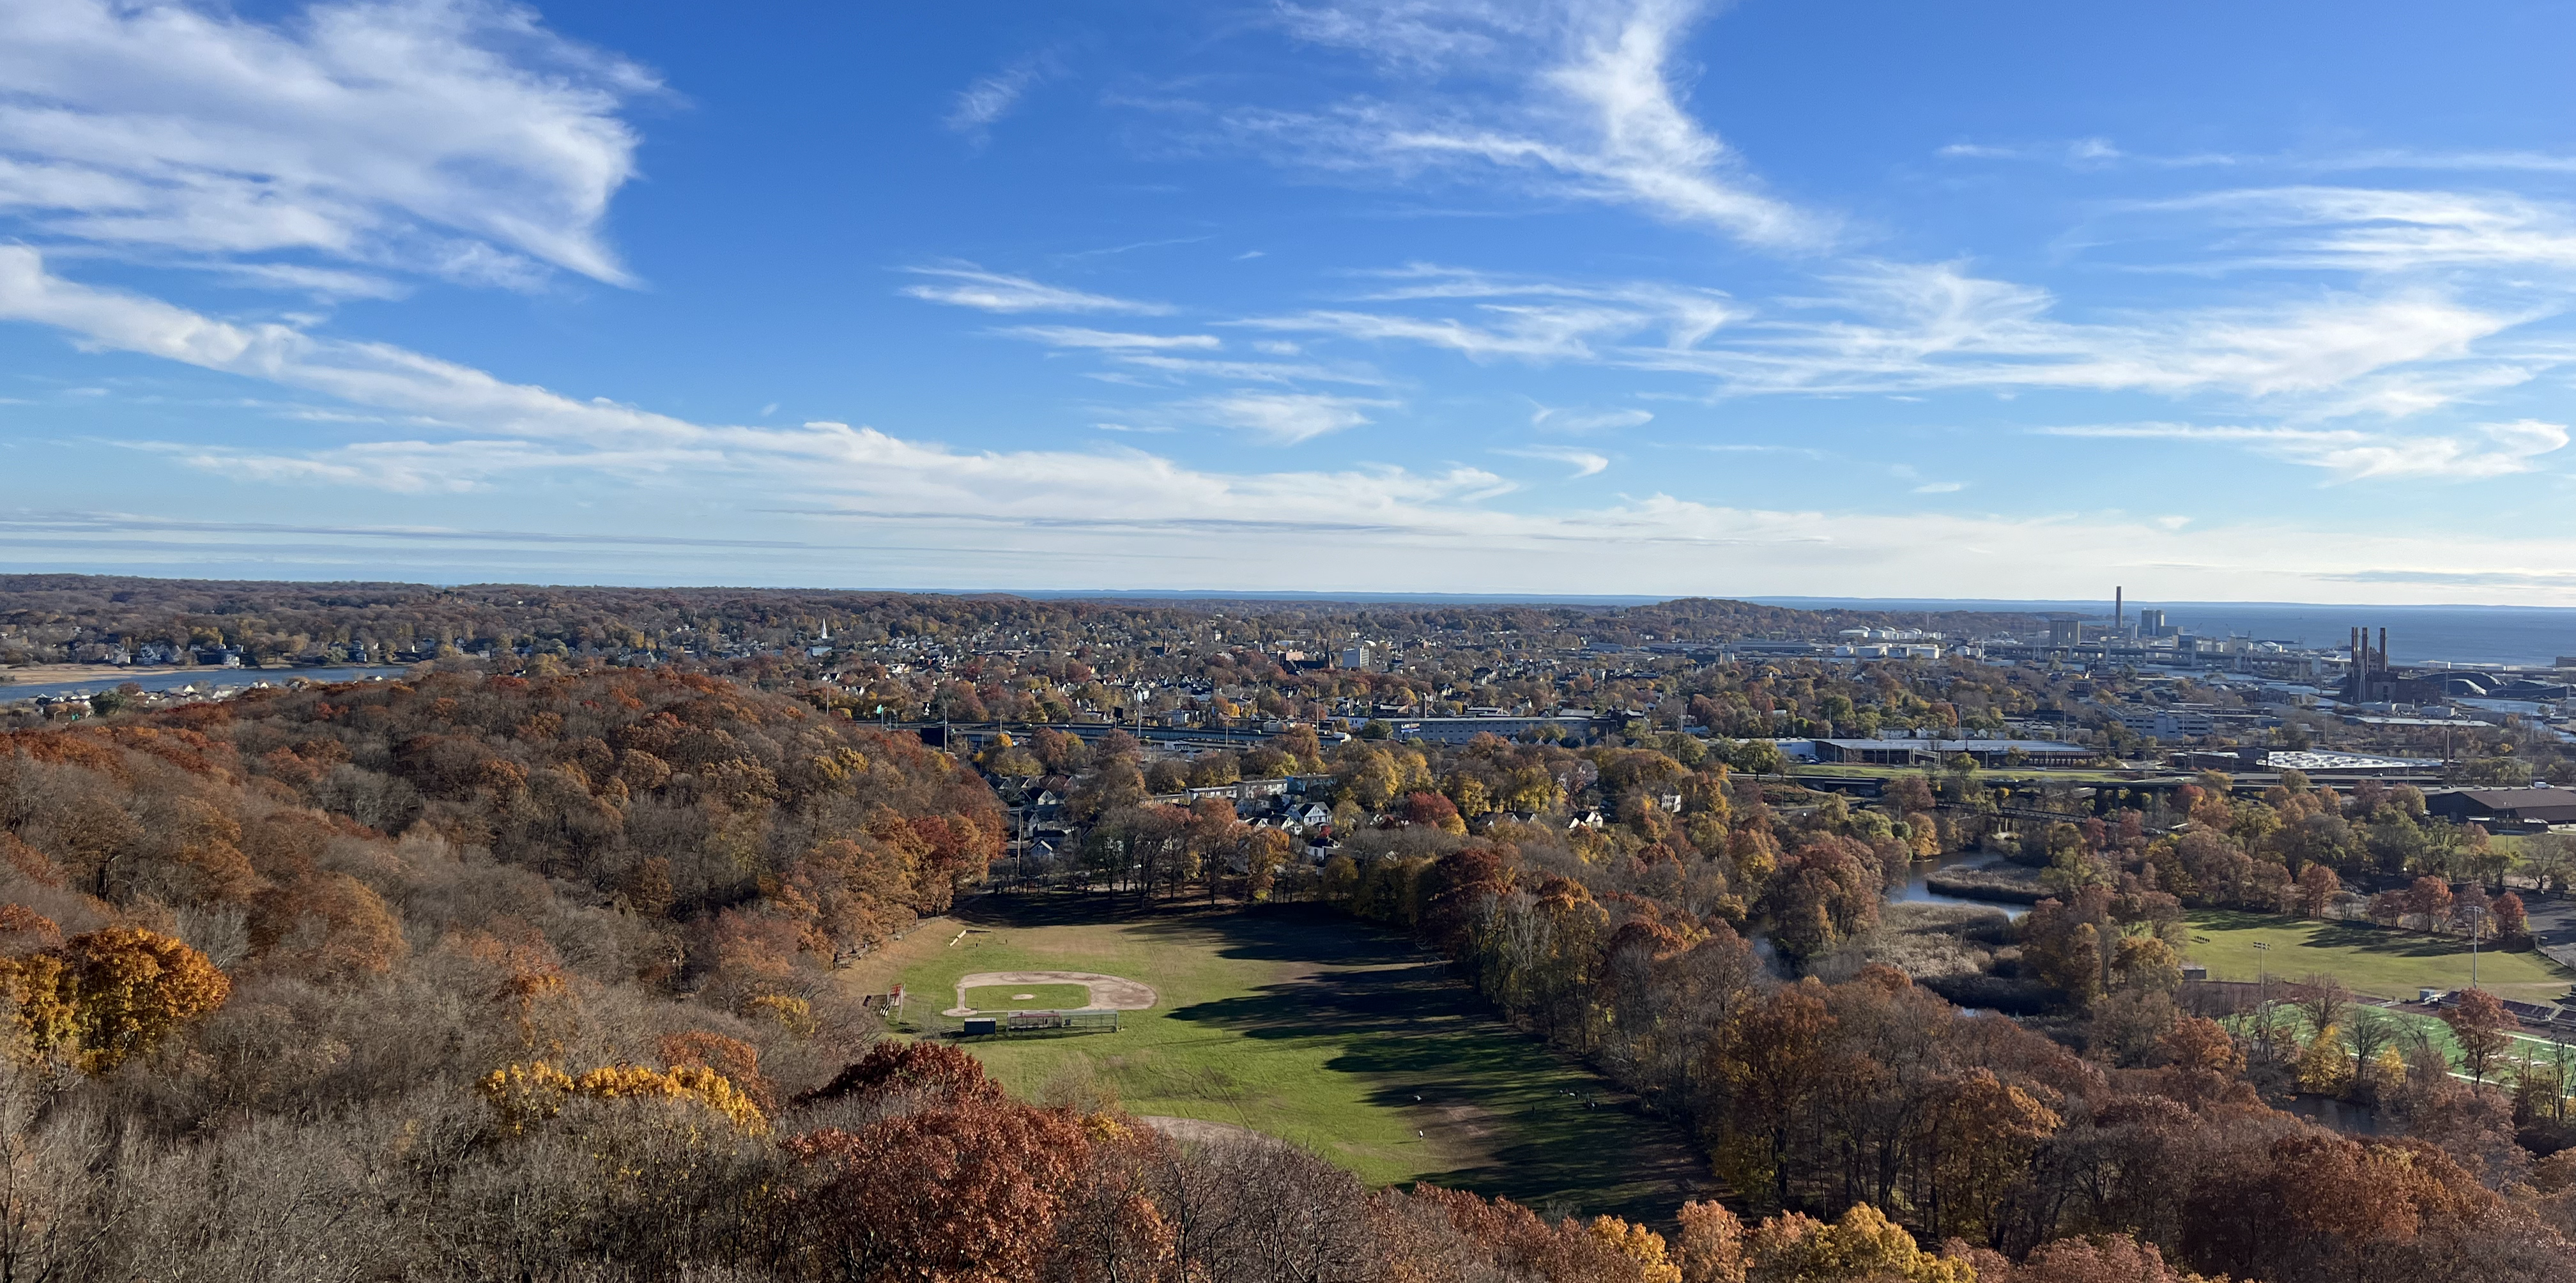 Looking east from East Rock Park, New Haven, CT